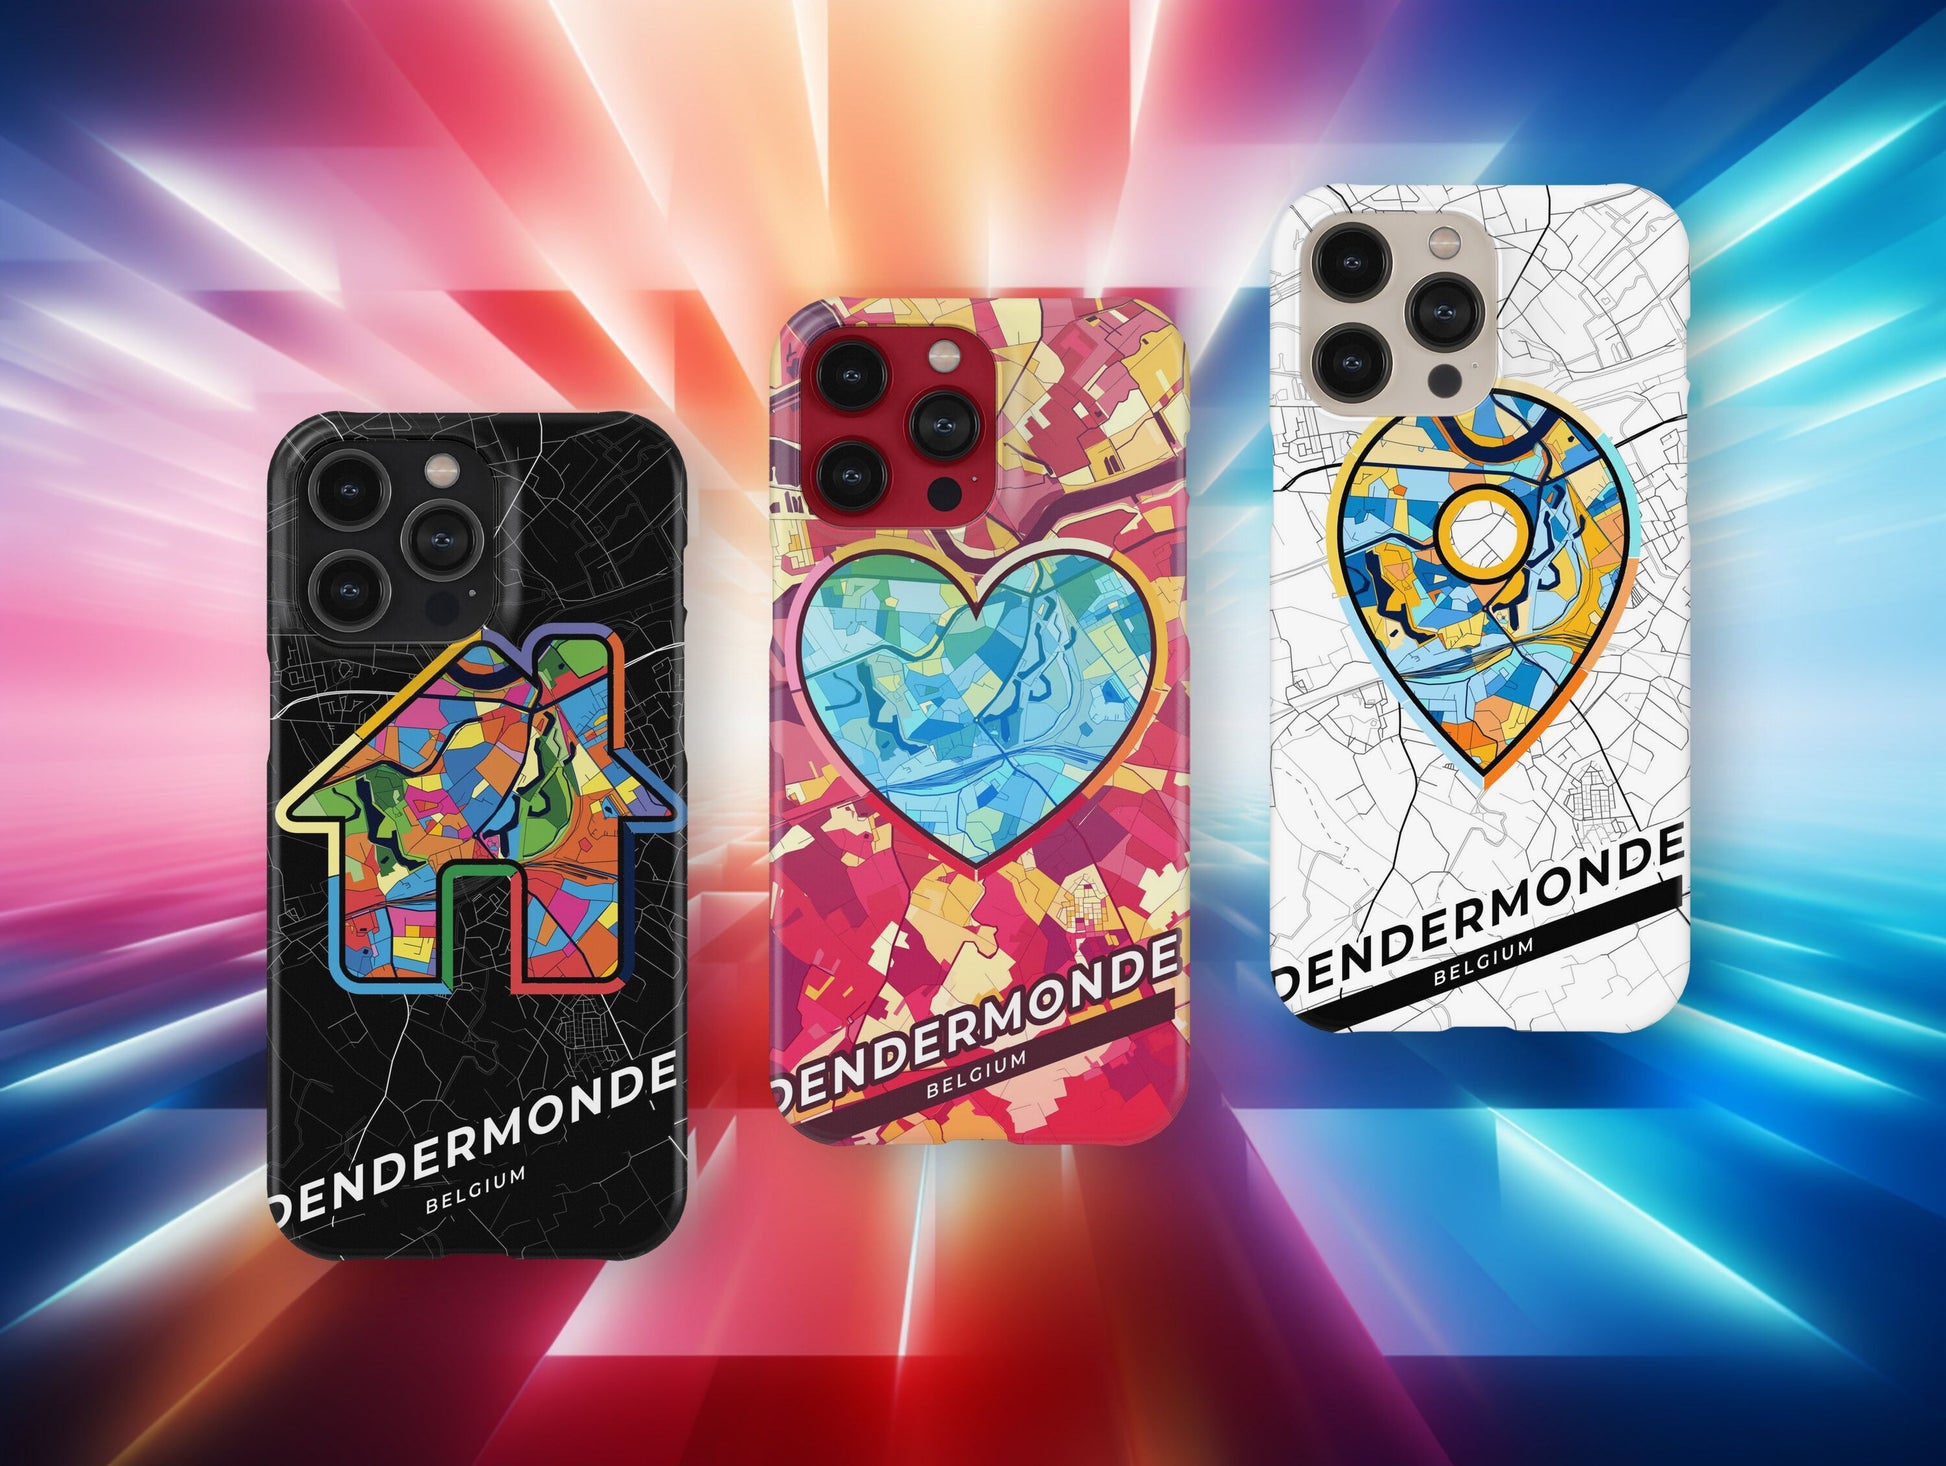 Dendermonde Belgium slim phone case with colorful icon. Birthday, wedding or housewarming gift. Couple match cases.